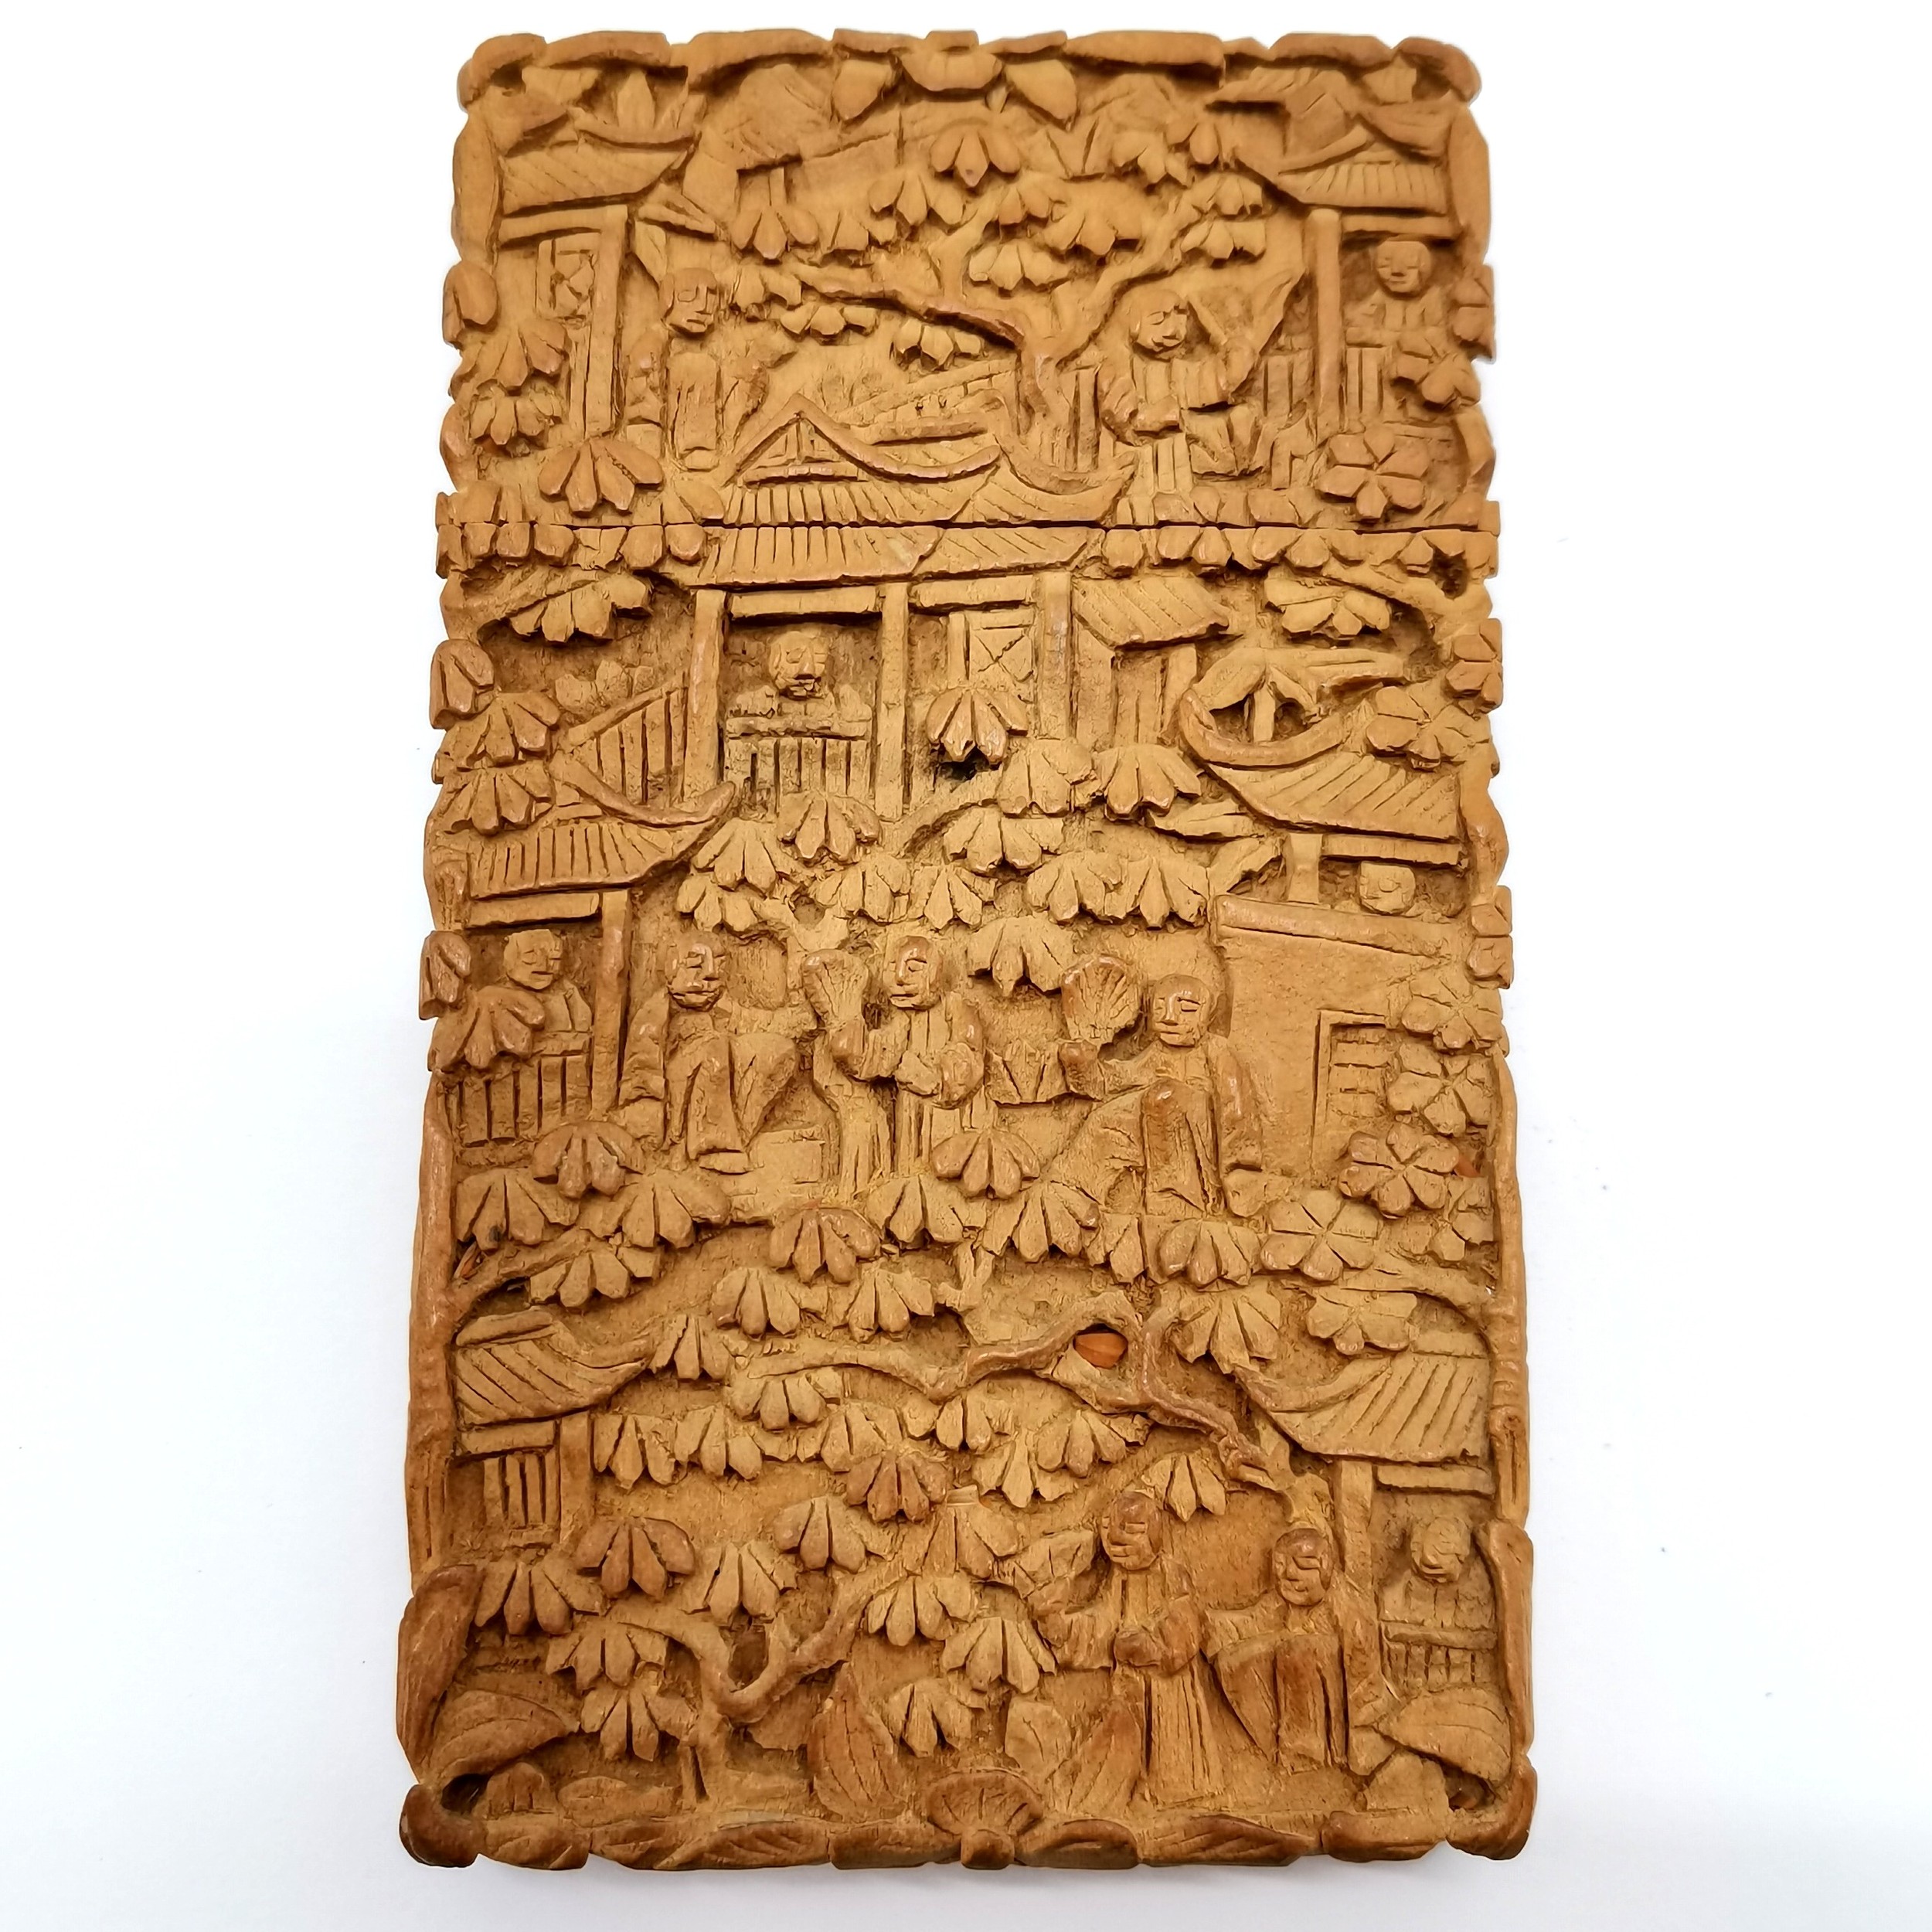 Antique Chinese Cantonese hand carved wooden card case - 9.6cm x 5.6cm & no obvious damage